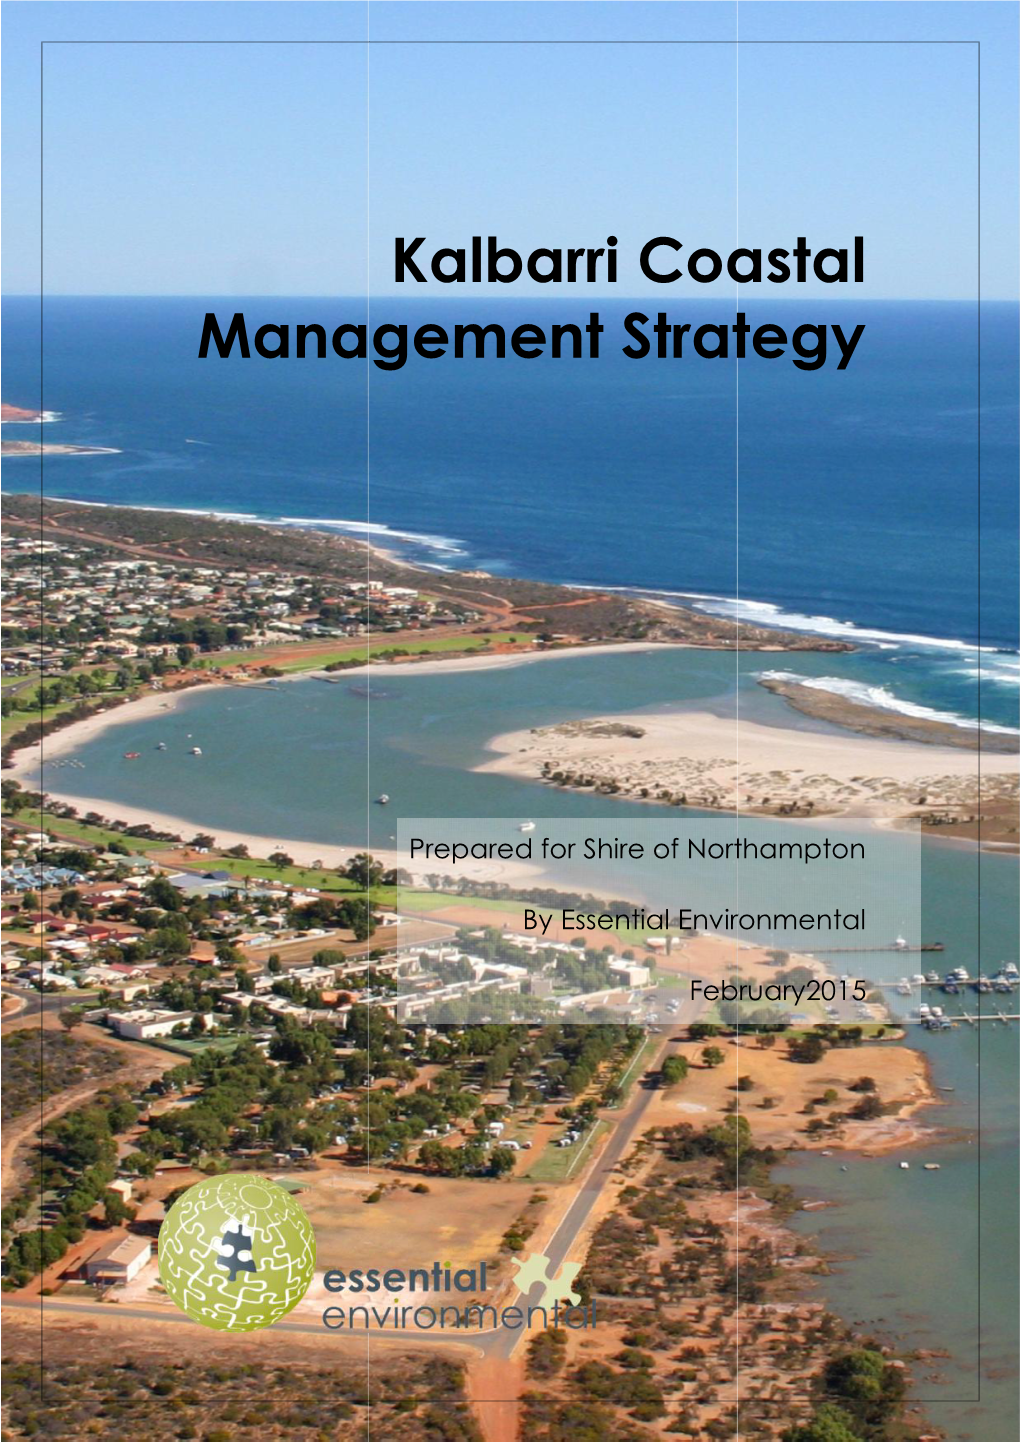 To Download the Kalbarri Coastal Management Strategy